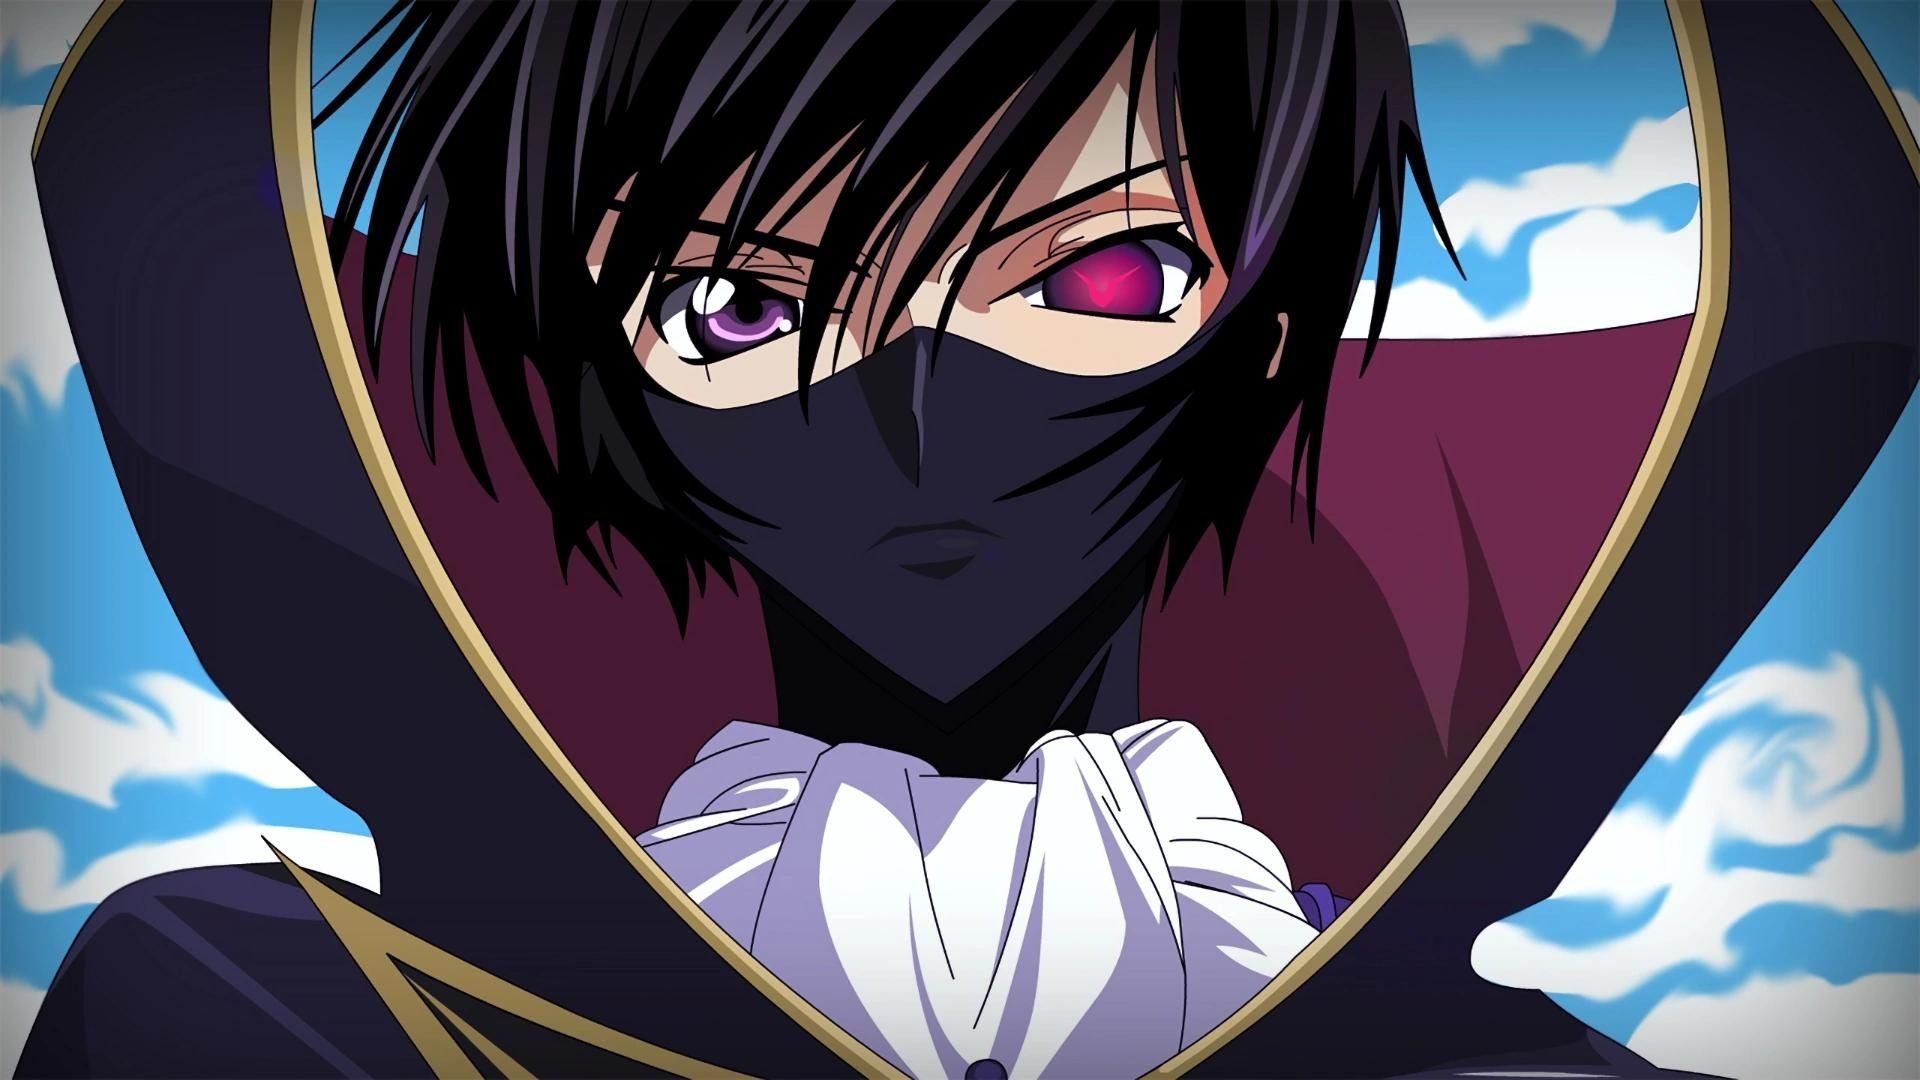 Lelouch lamperouge an anime character who can defeat Thanos